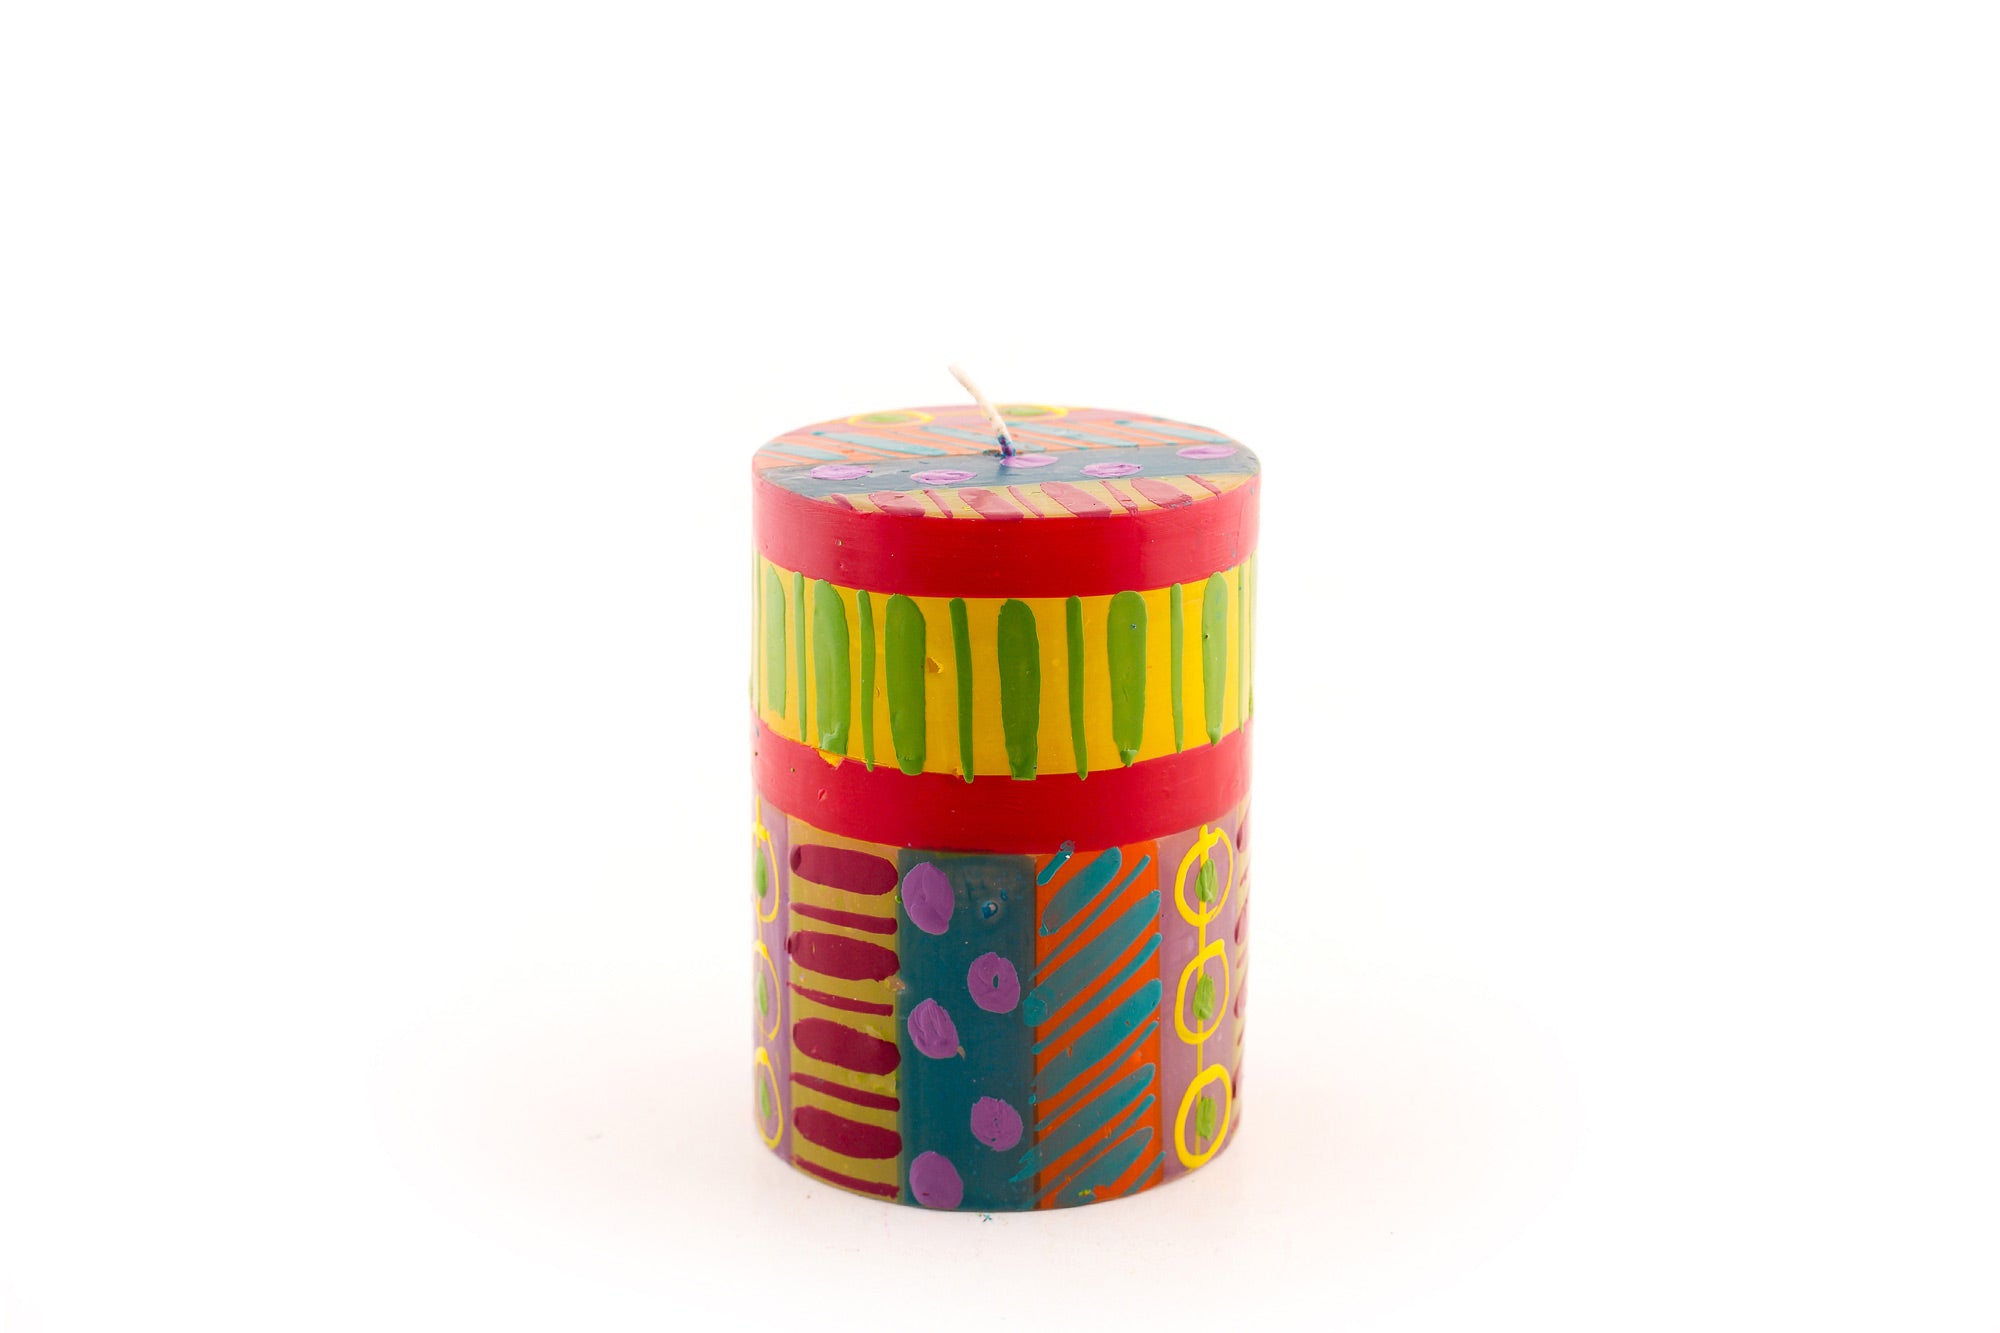 Carousel 3 X 4" pillar candle. Dots, stripes and circles in pinks, purple, yellow, red, greens and turquoise!